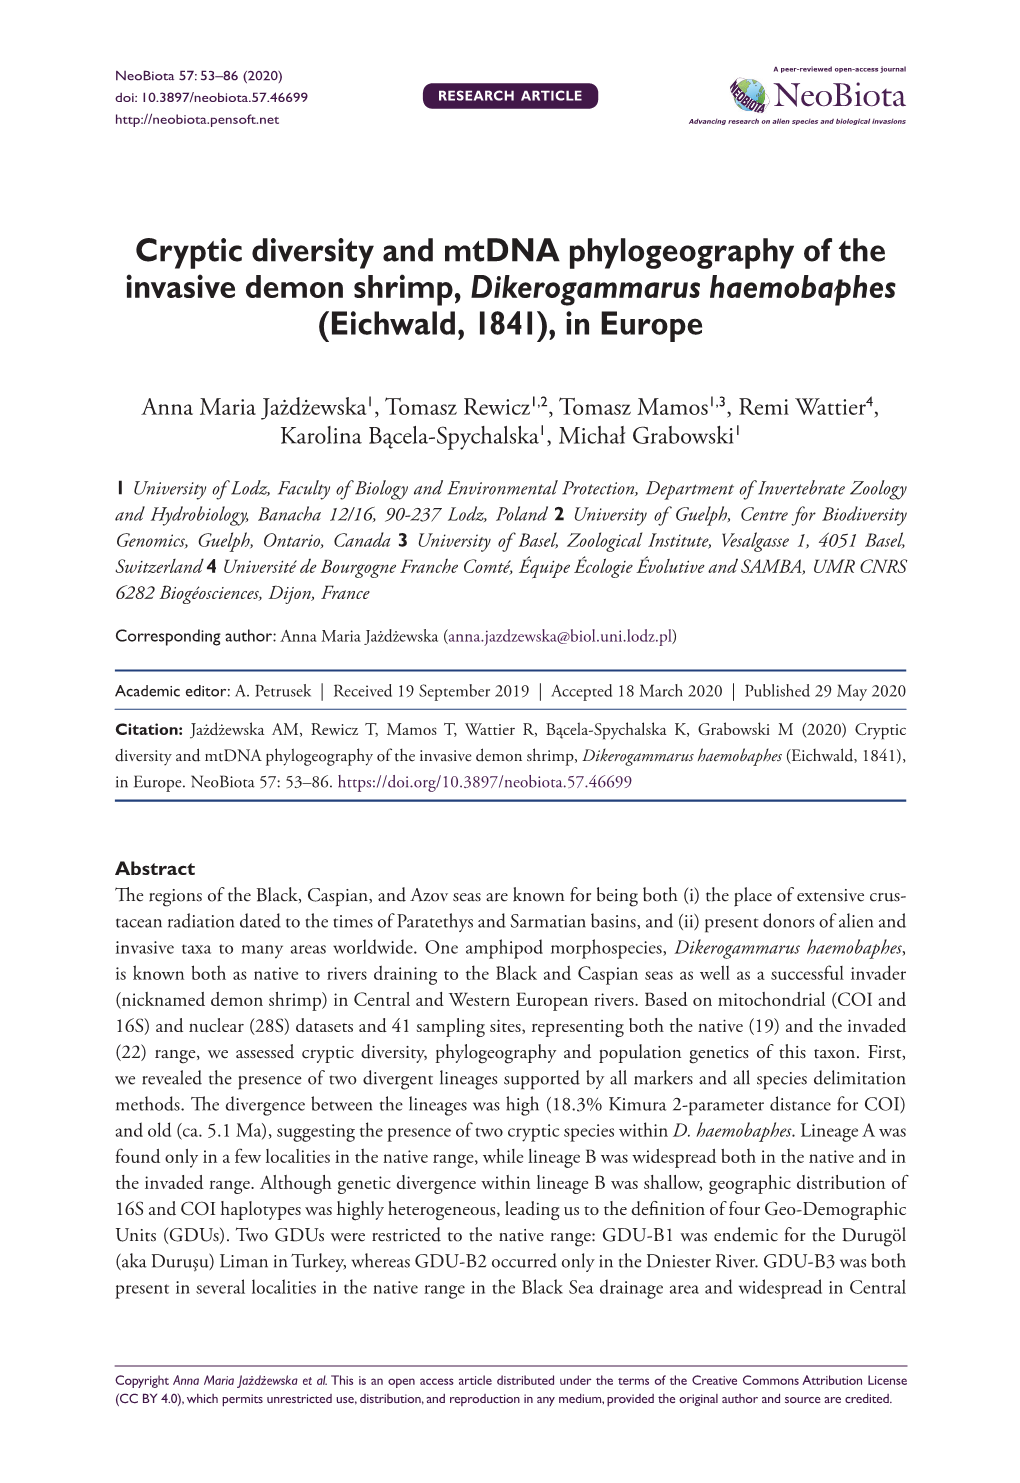 Cryptic Diversity and Mtdna Phylogeography of the Invasive Demon Shrimp, Dikerogammarus Haemobaphes (Eichwald, 1841), in Europe